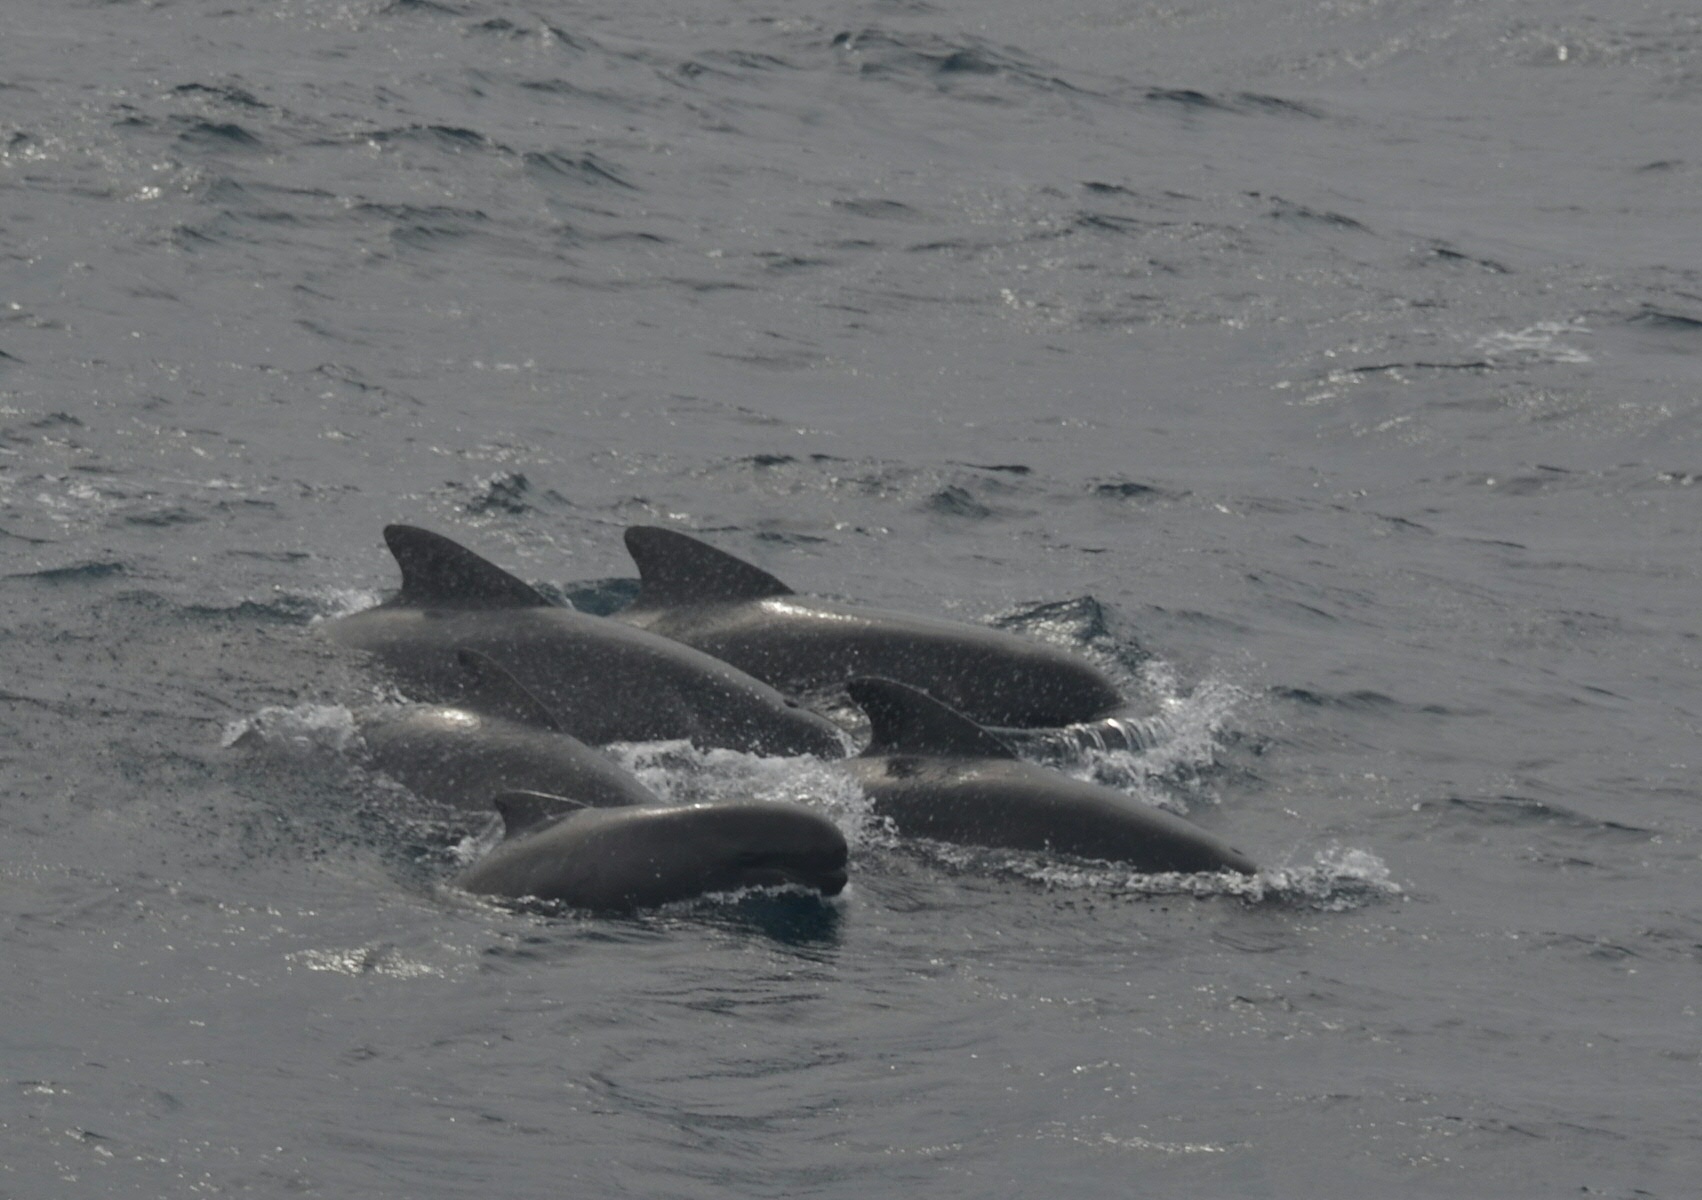 Lng-finned pilot whales jumping alongside the boat